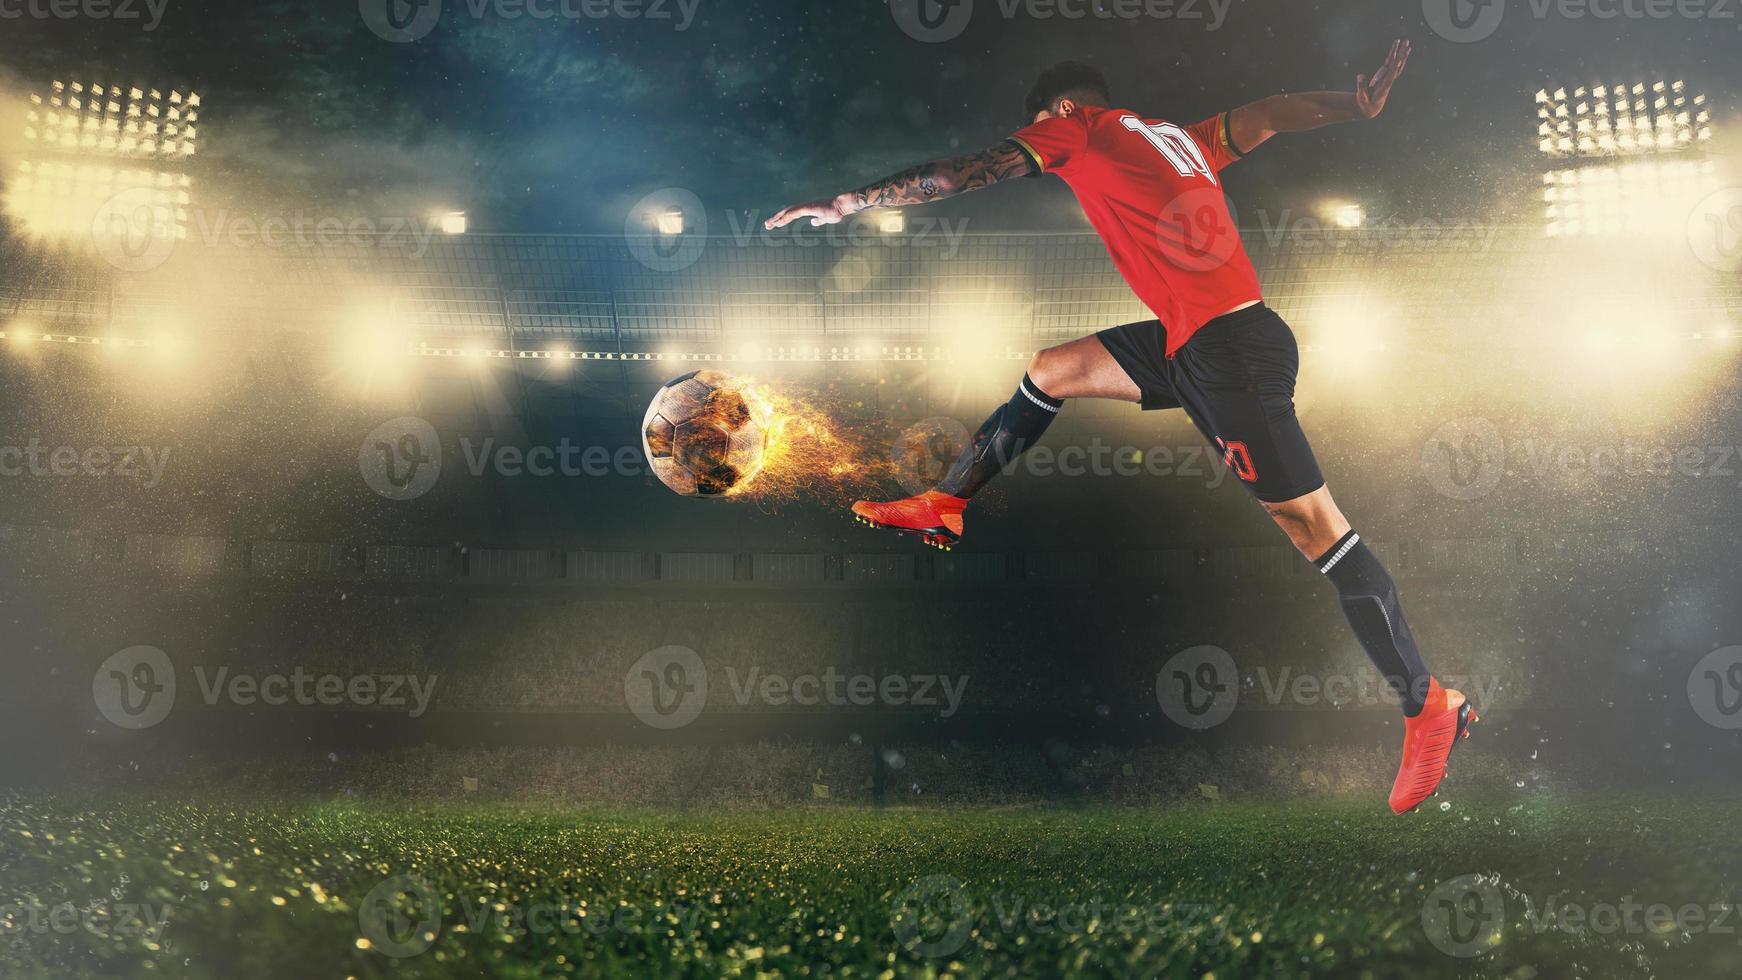 Soccer scene at night match with player in a red uniform kicking a fiery ball with power photo